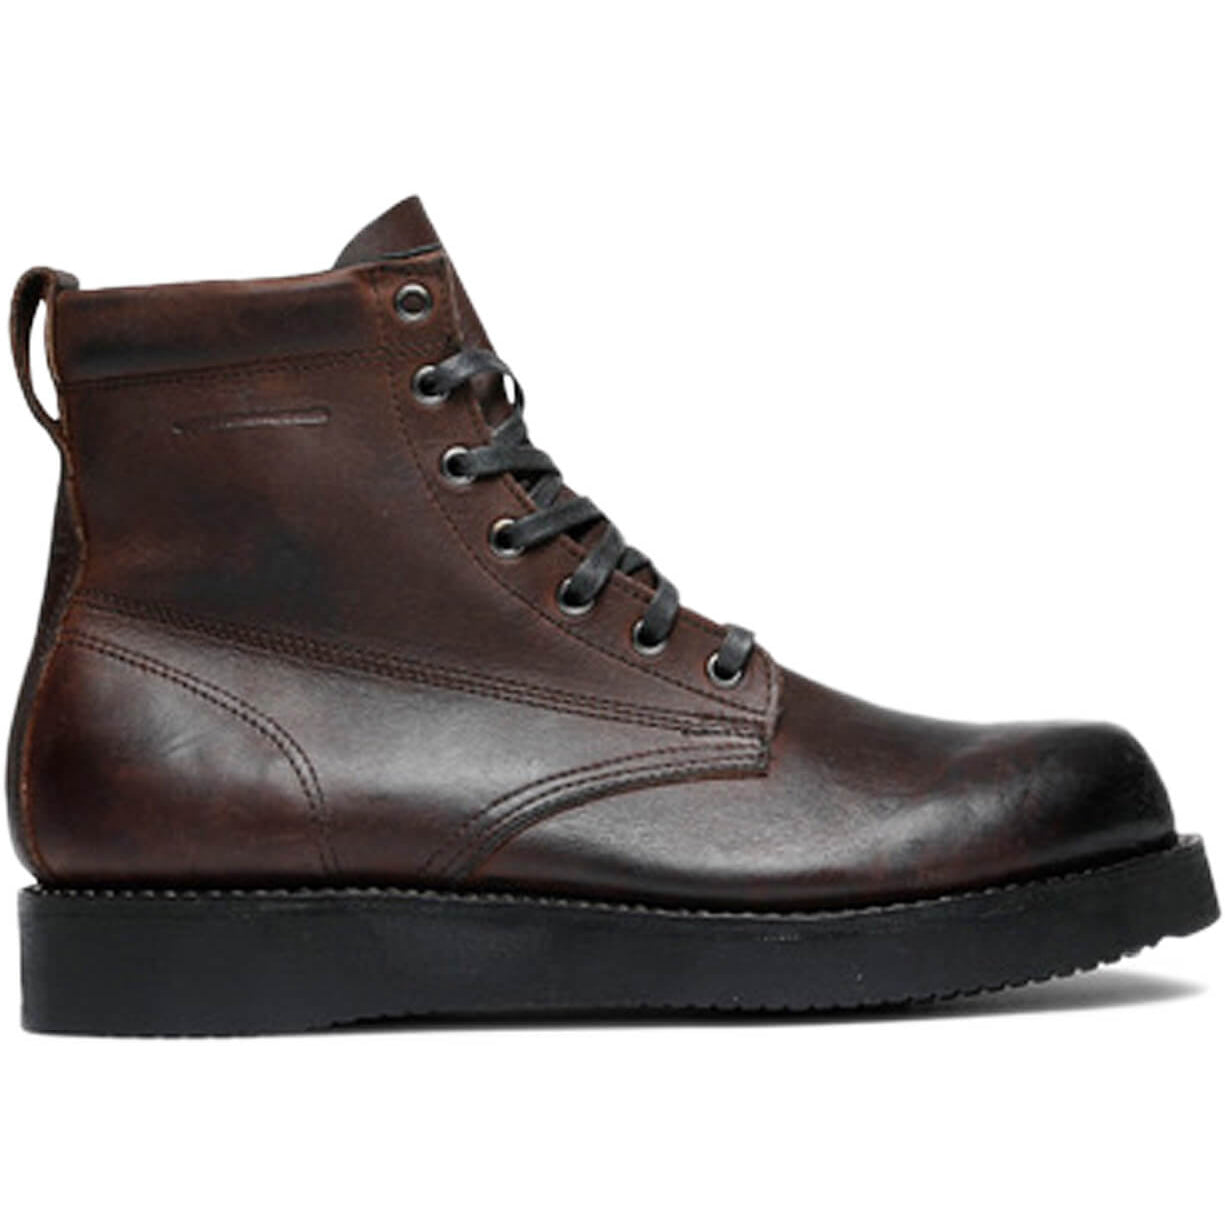 A men's James Boot from the Broken Homme collection.